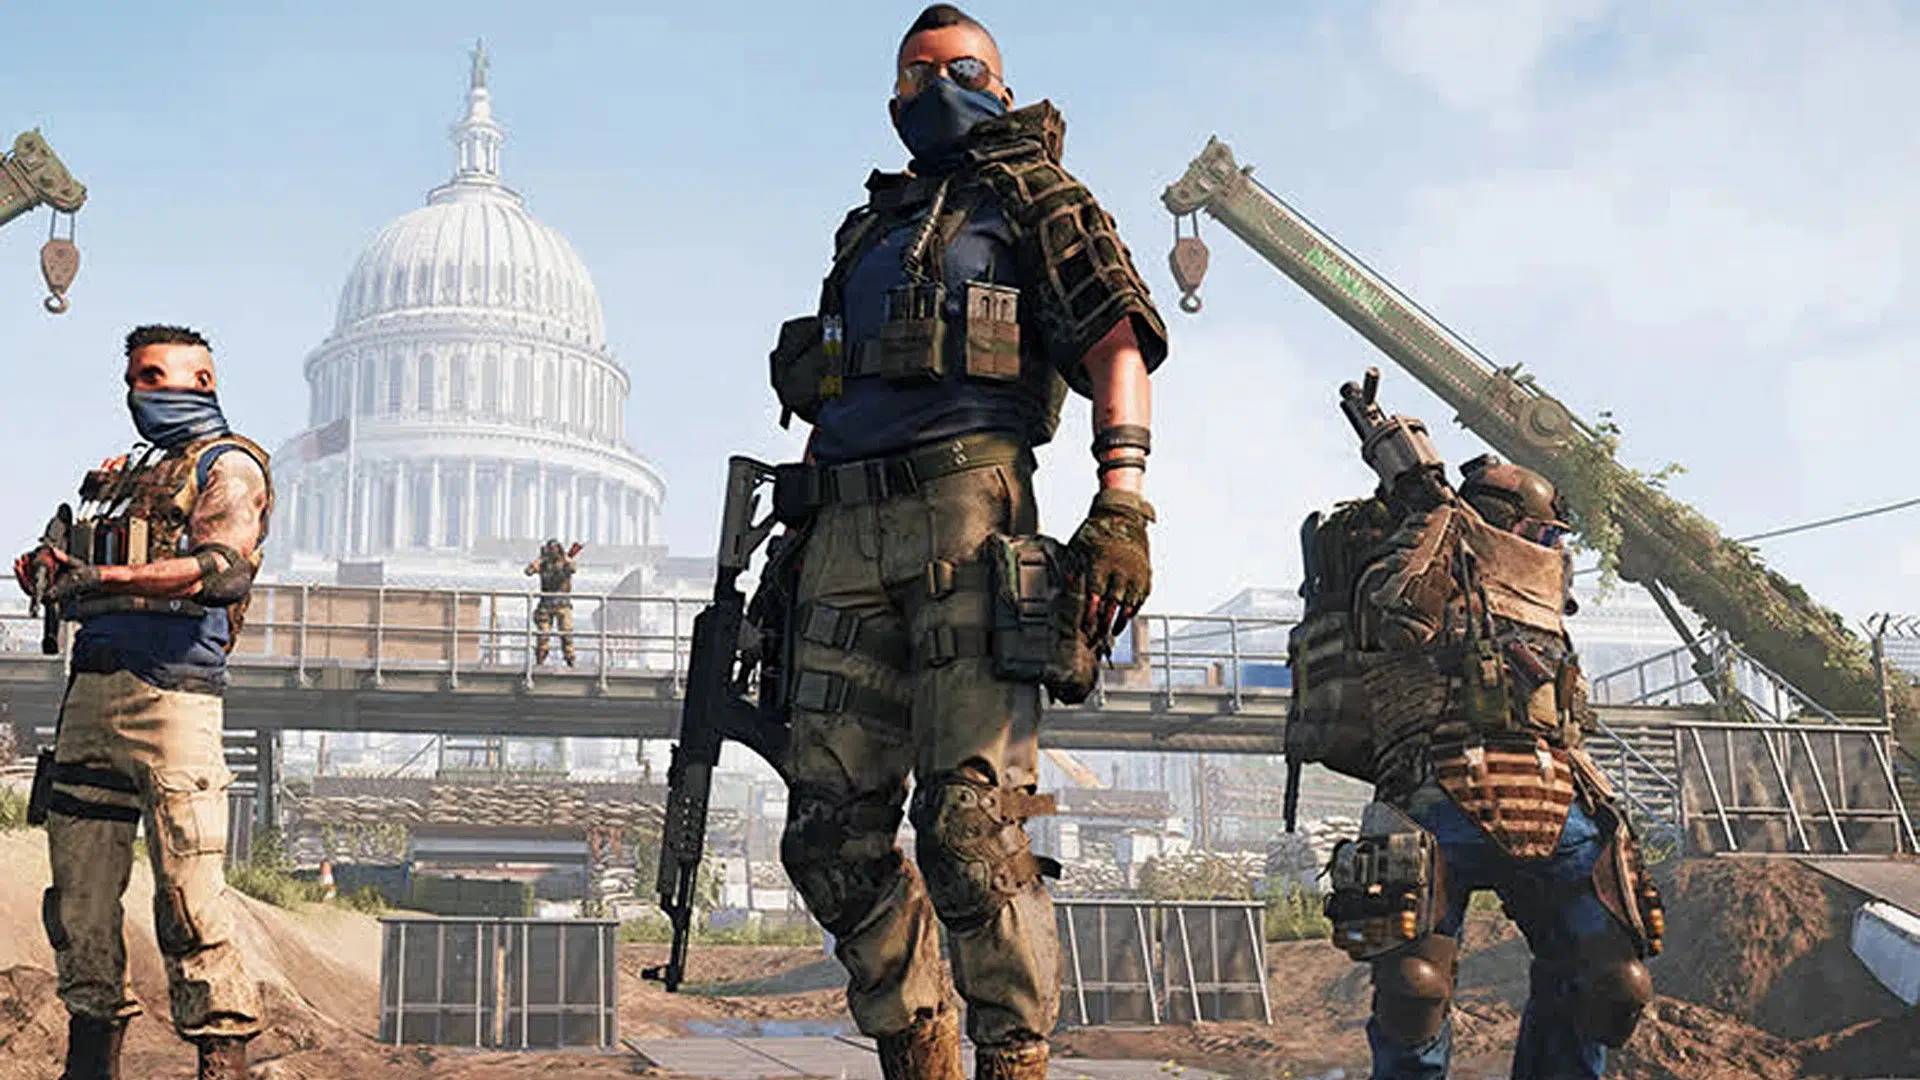 The Division 2 Update 1.67